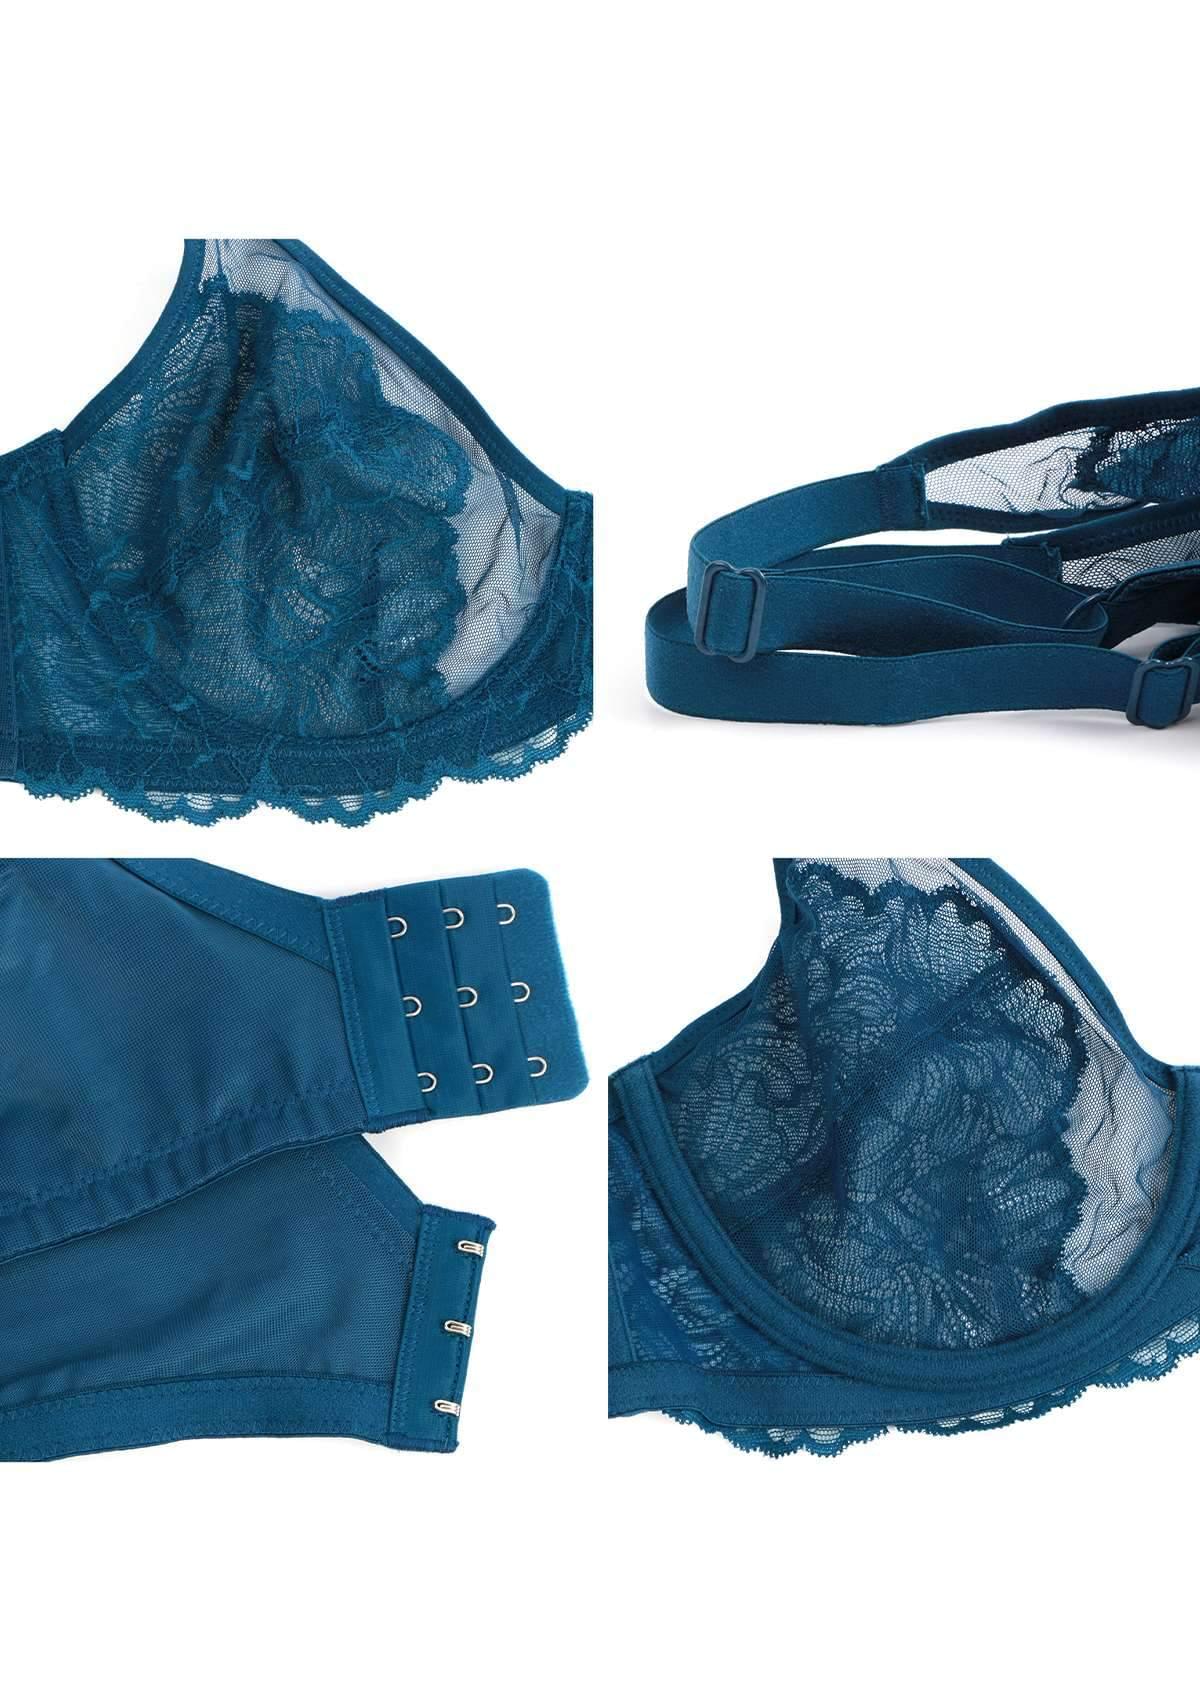 HSIA Blossom Lace Bra And Underwear Sets: Comfortable Plus Size Bra - Biscay Blue / 36 / C